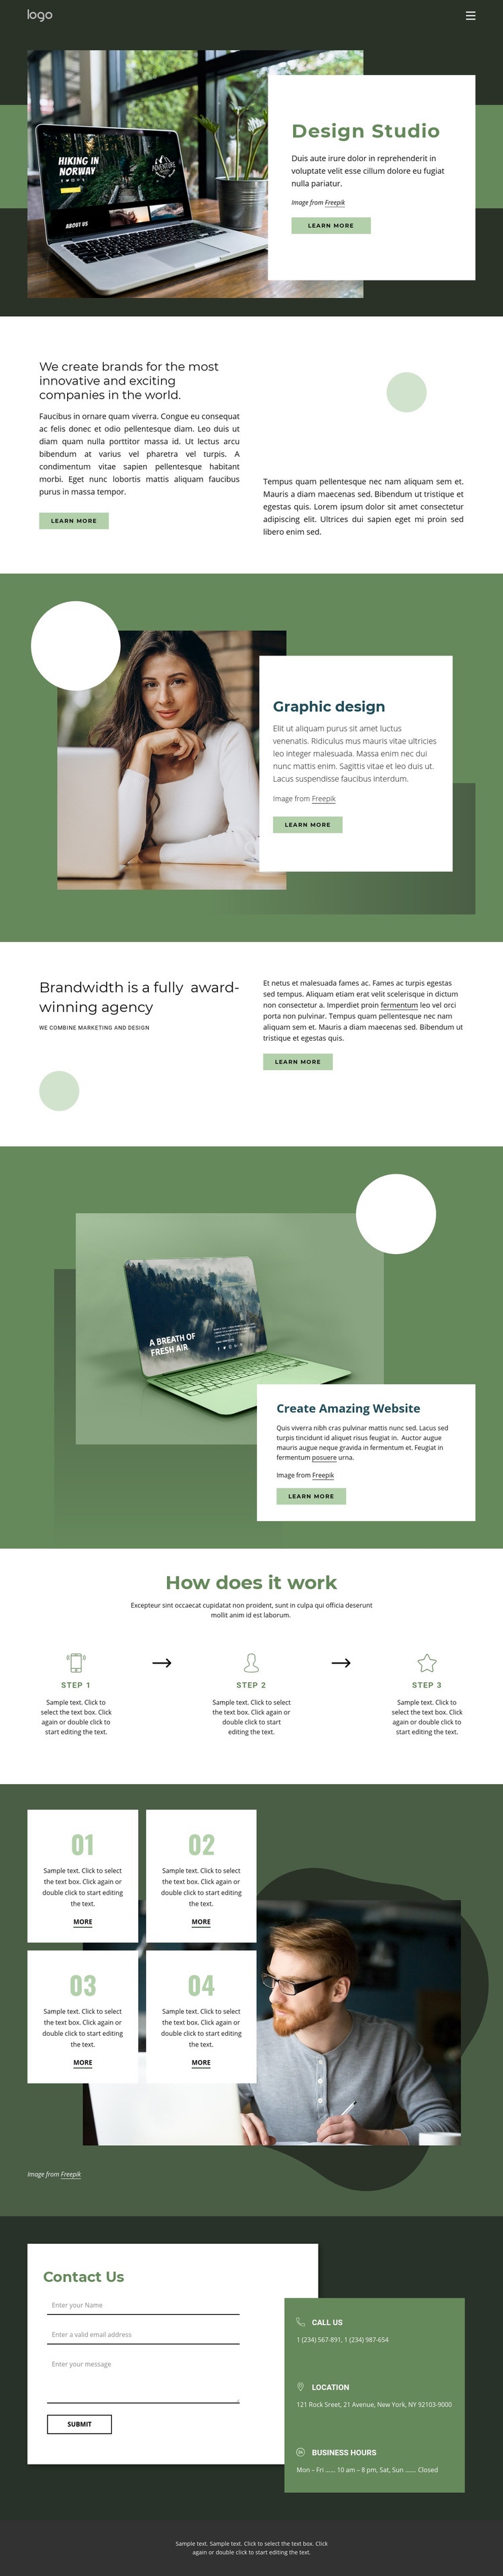 Design inspiration from nature Wix Template Alternative